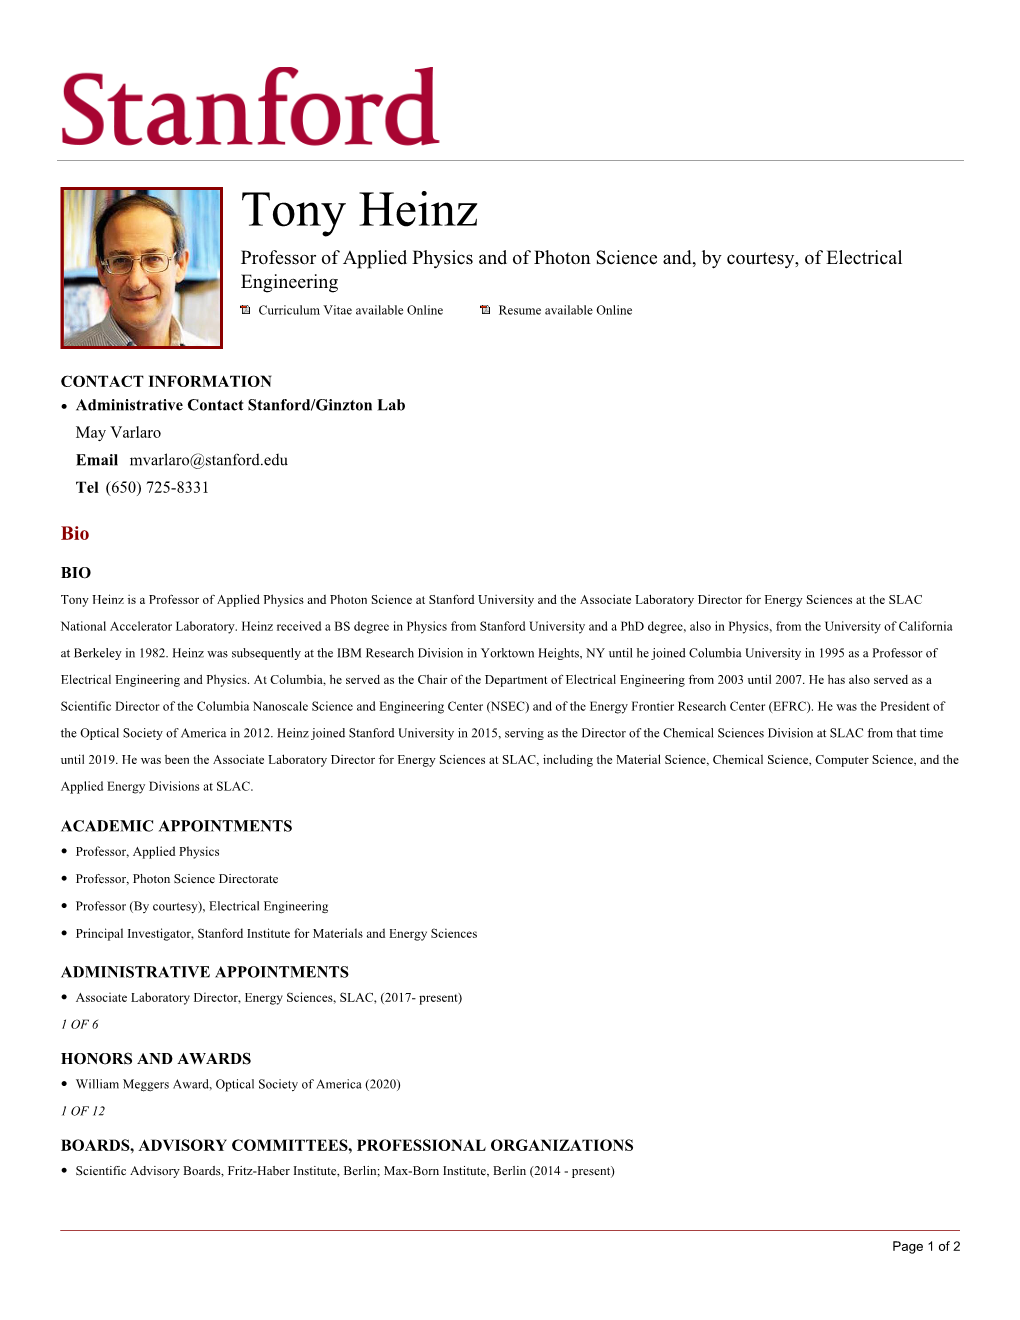 Tony Heinz Professor of Applied Physics and of Photon Science And, by Courtesy, of Electrical Engineering Curriculum Vitae Available Online Resume Available Online